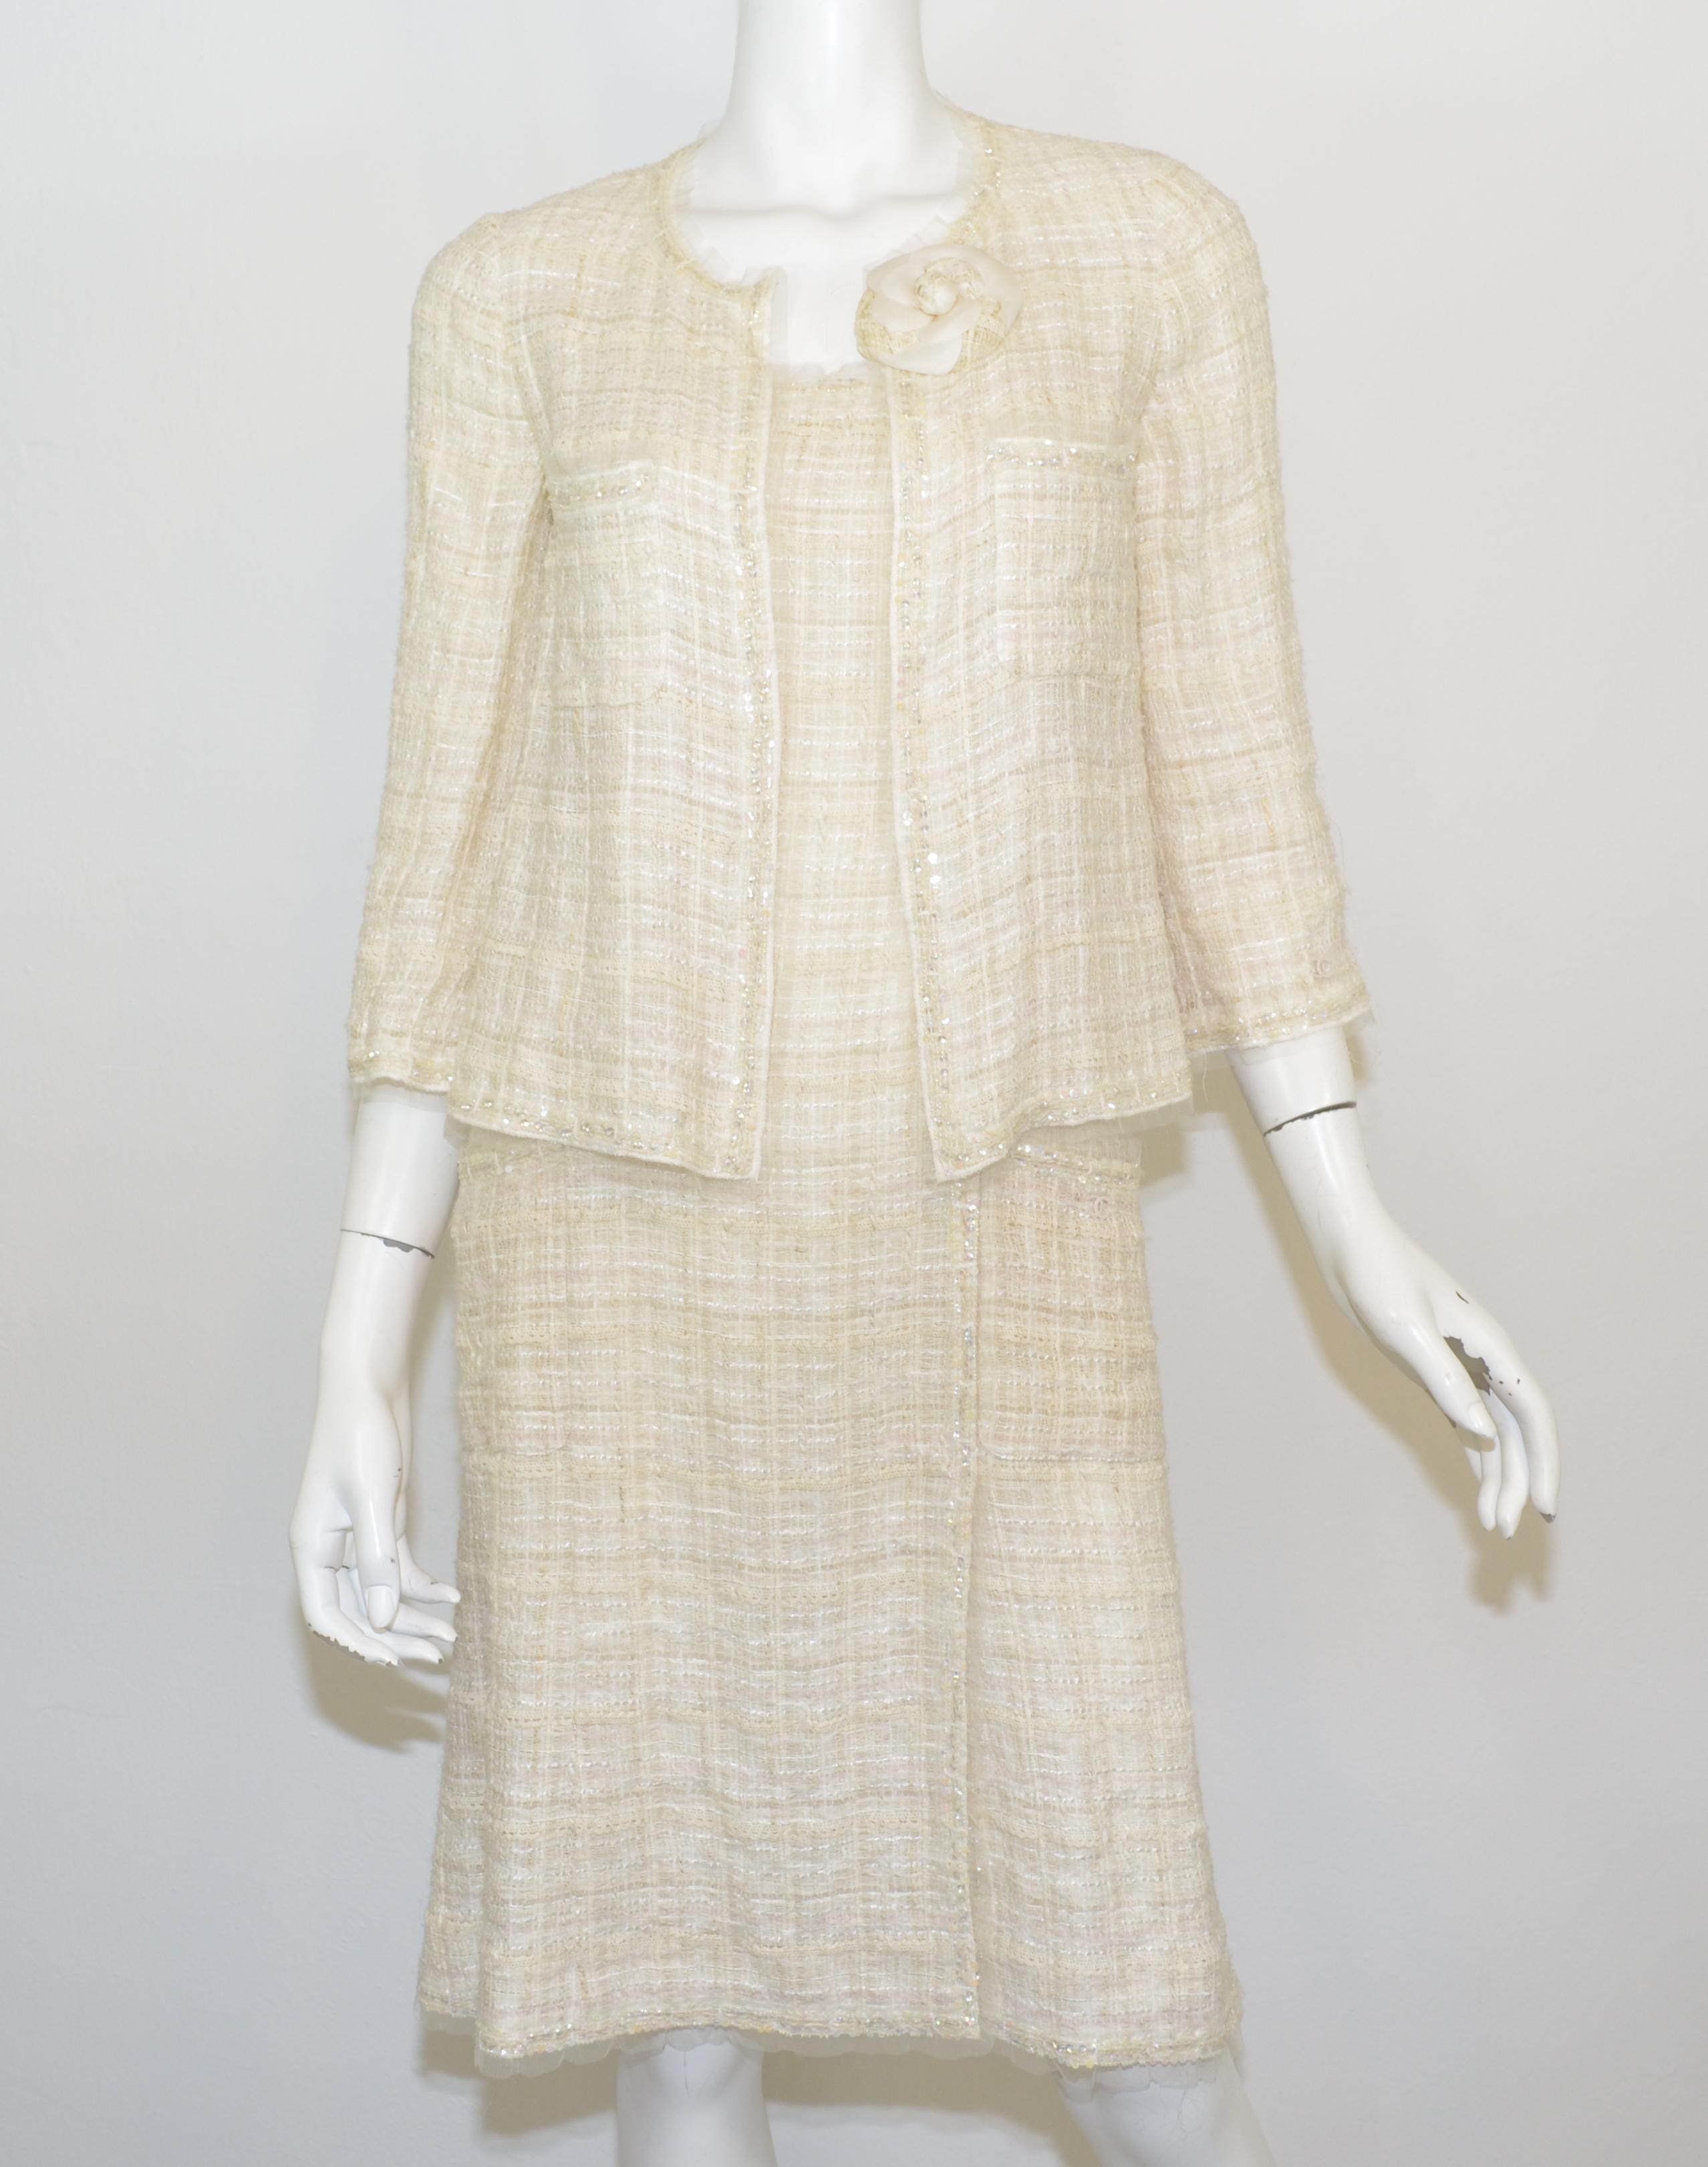 This Chanel 3-piece set includes a tweed dress, tweed jacket, and a signature Camellia brooch that is optional. Chanel set is featured in a cream, ivory tweed with a mesh trim and sequined embellishing throughout. Dress has a zipper and hook